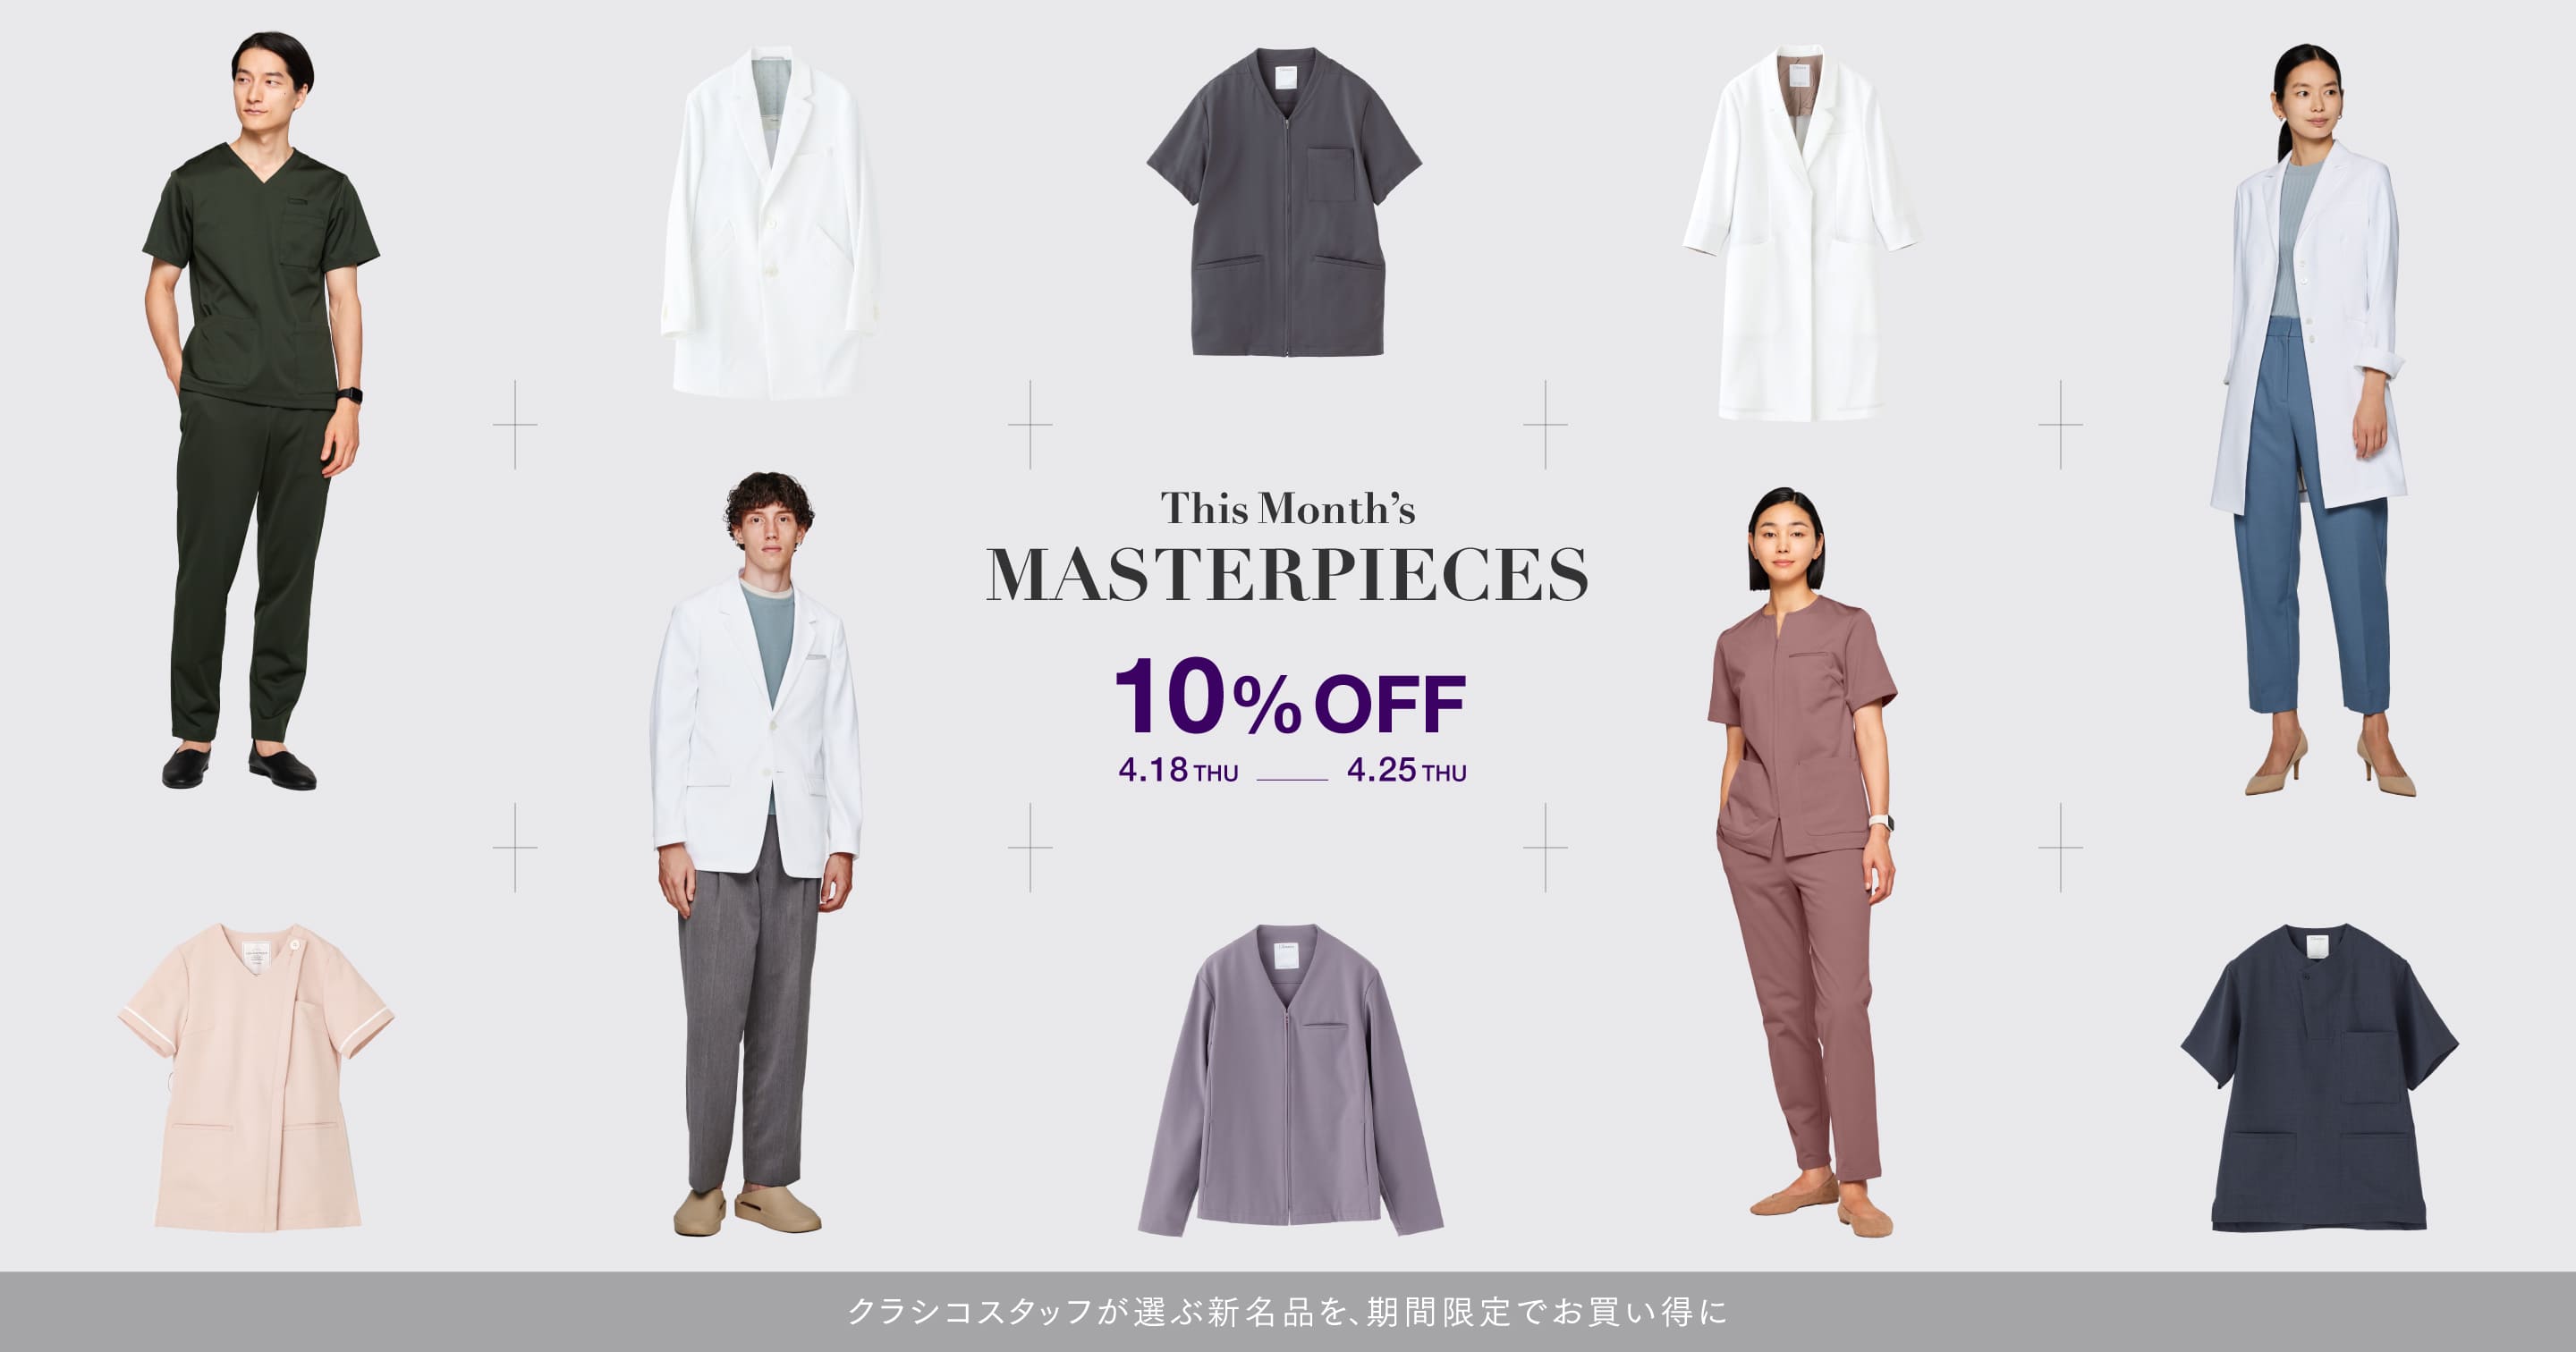 This Month's MASTERPIECES 10% OFF